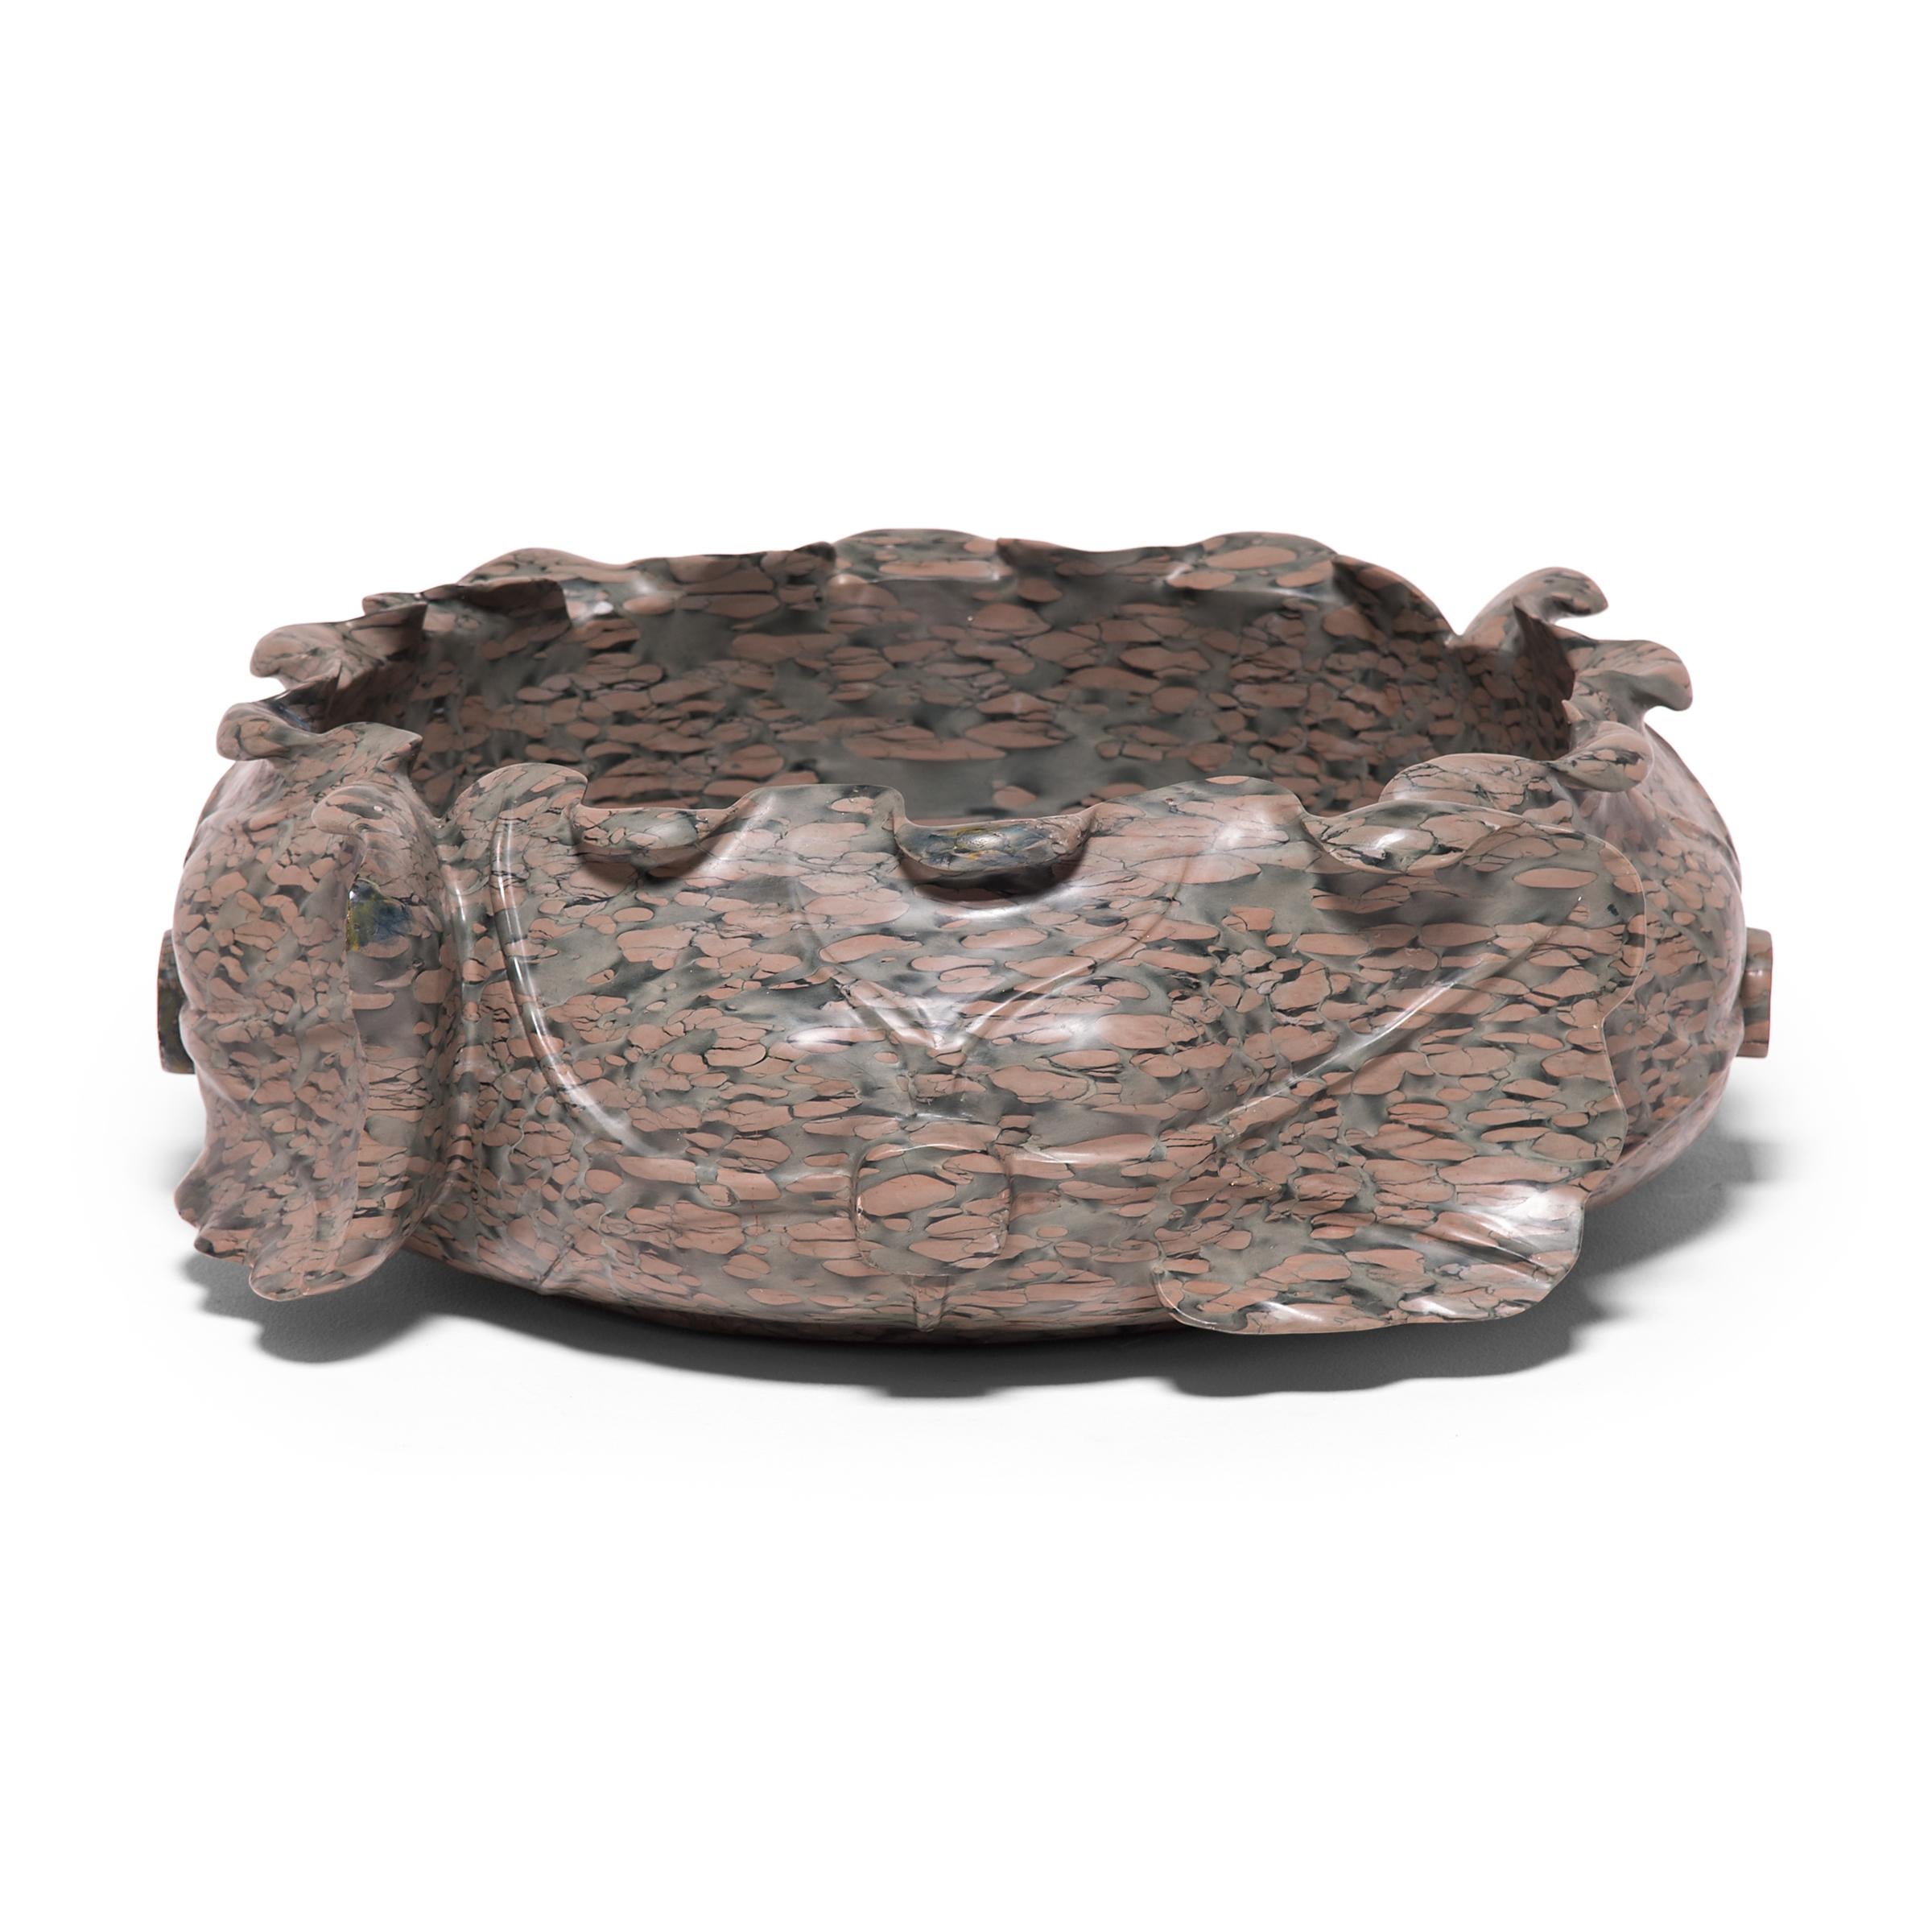 Hand-Carved Hand Carved Chinese Lotus Form Stone Basin